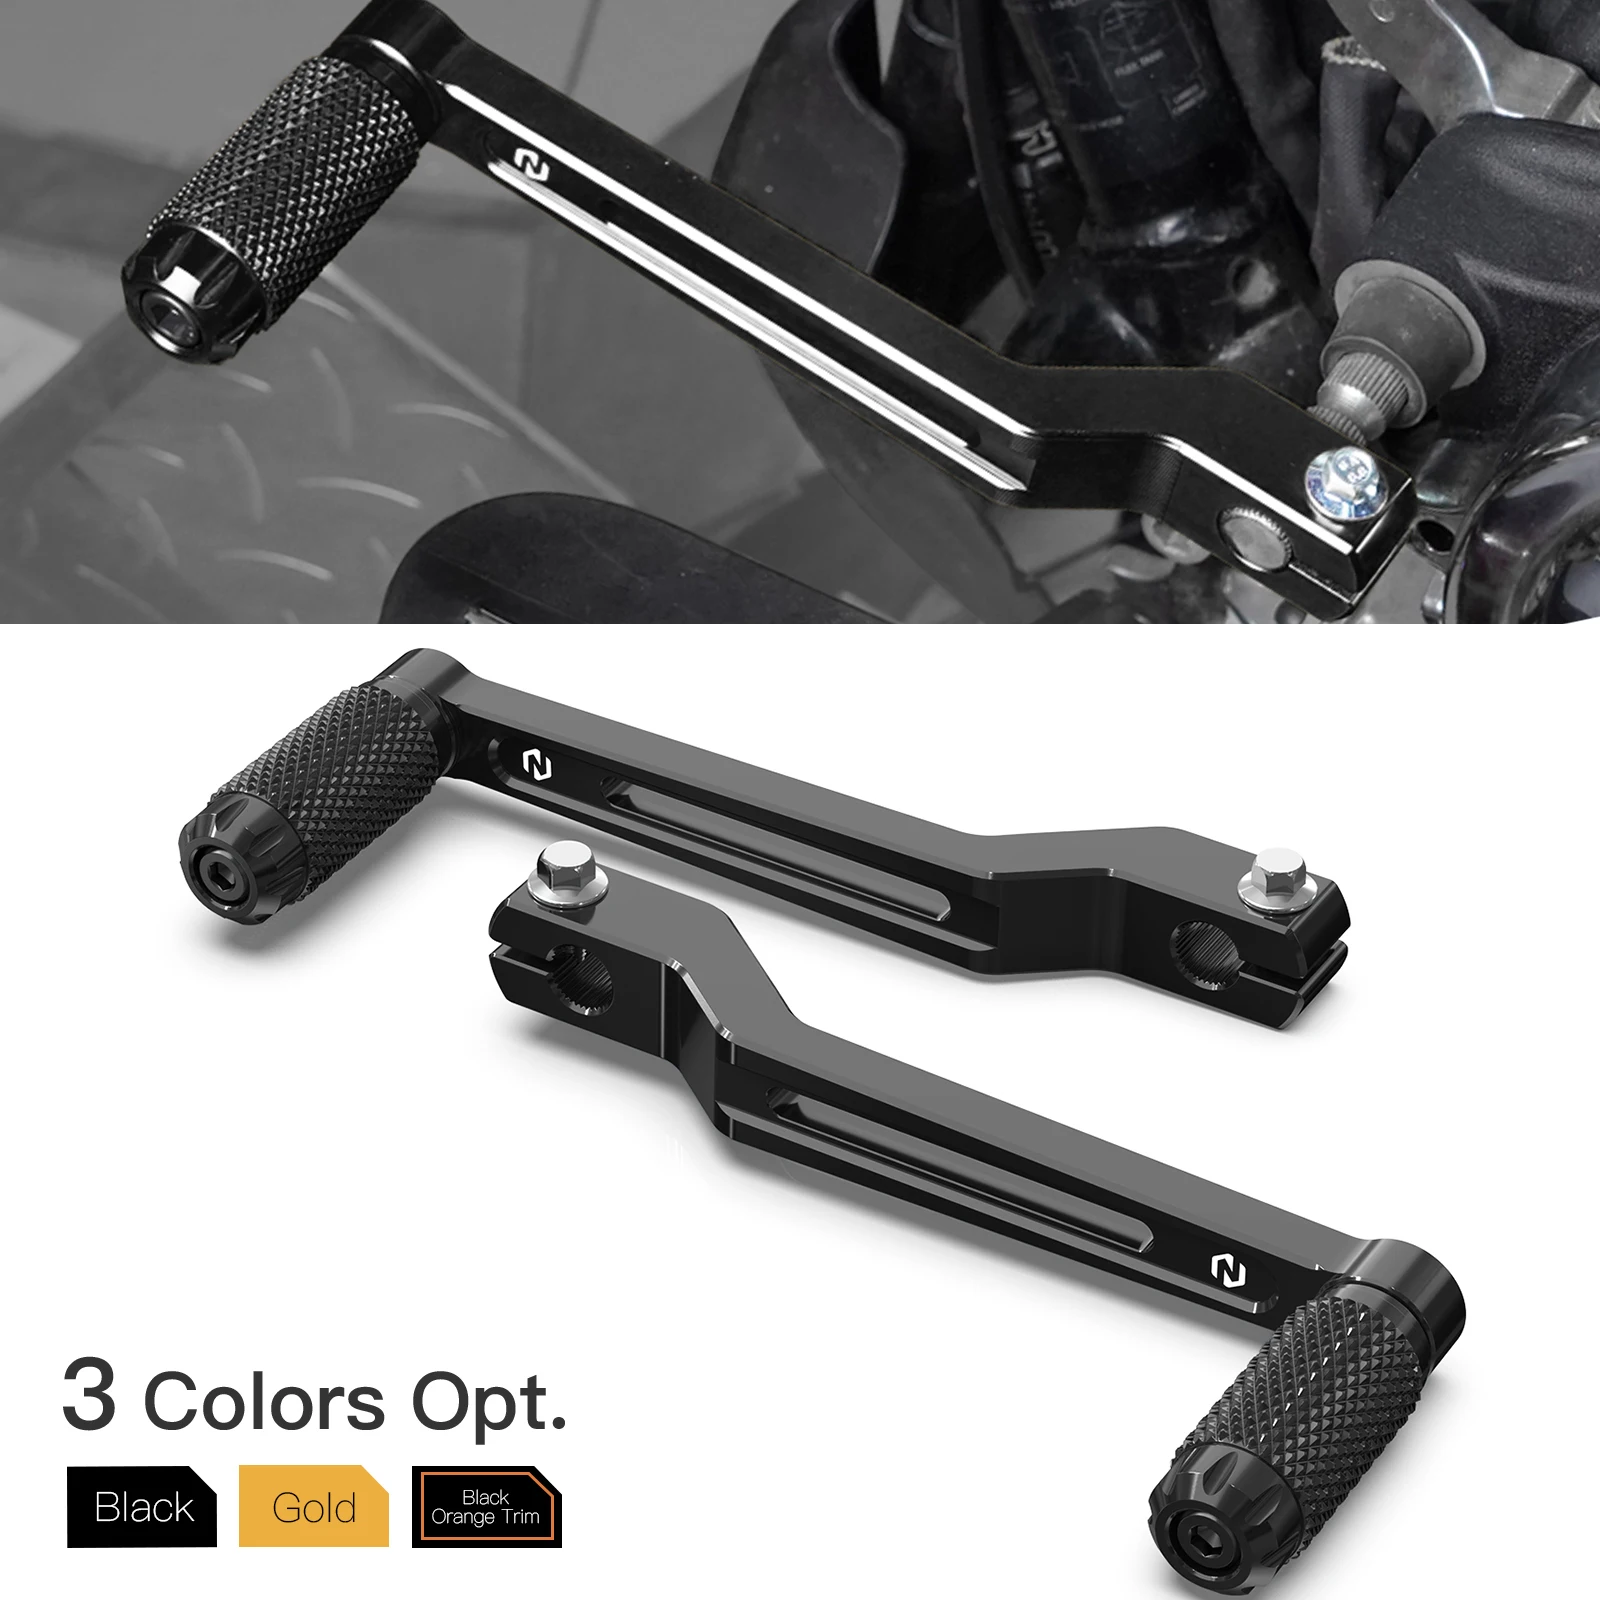 Gear Shift Lever Shifter Levers For Harley Softail Fat Boy Touring Road ... - $89.98